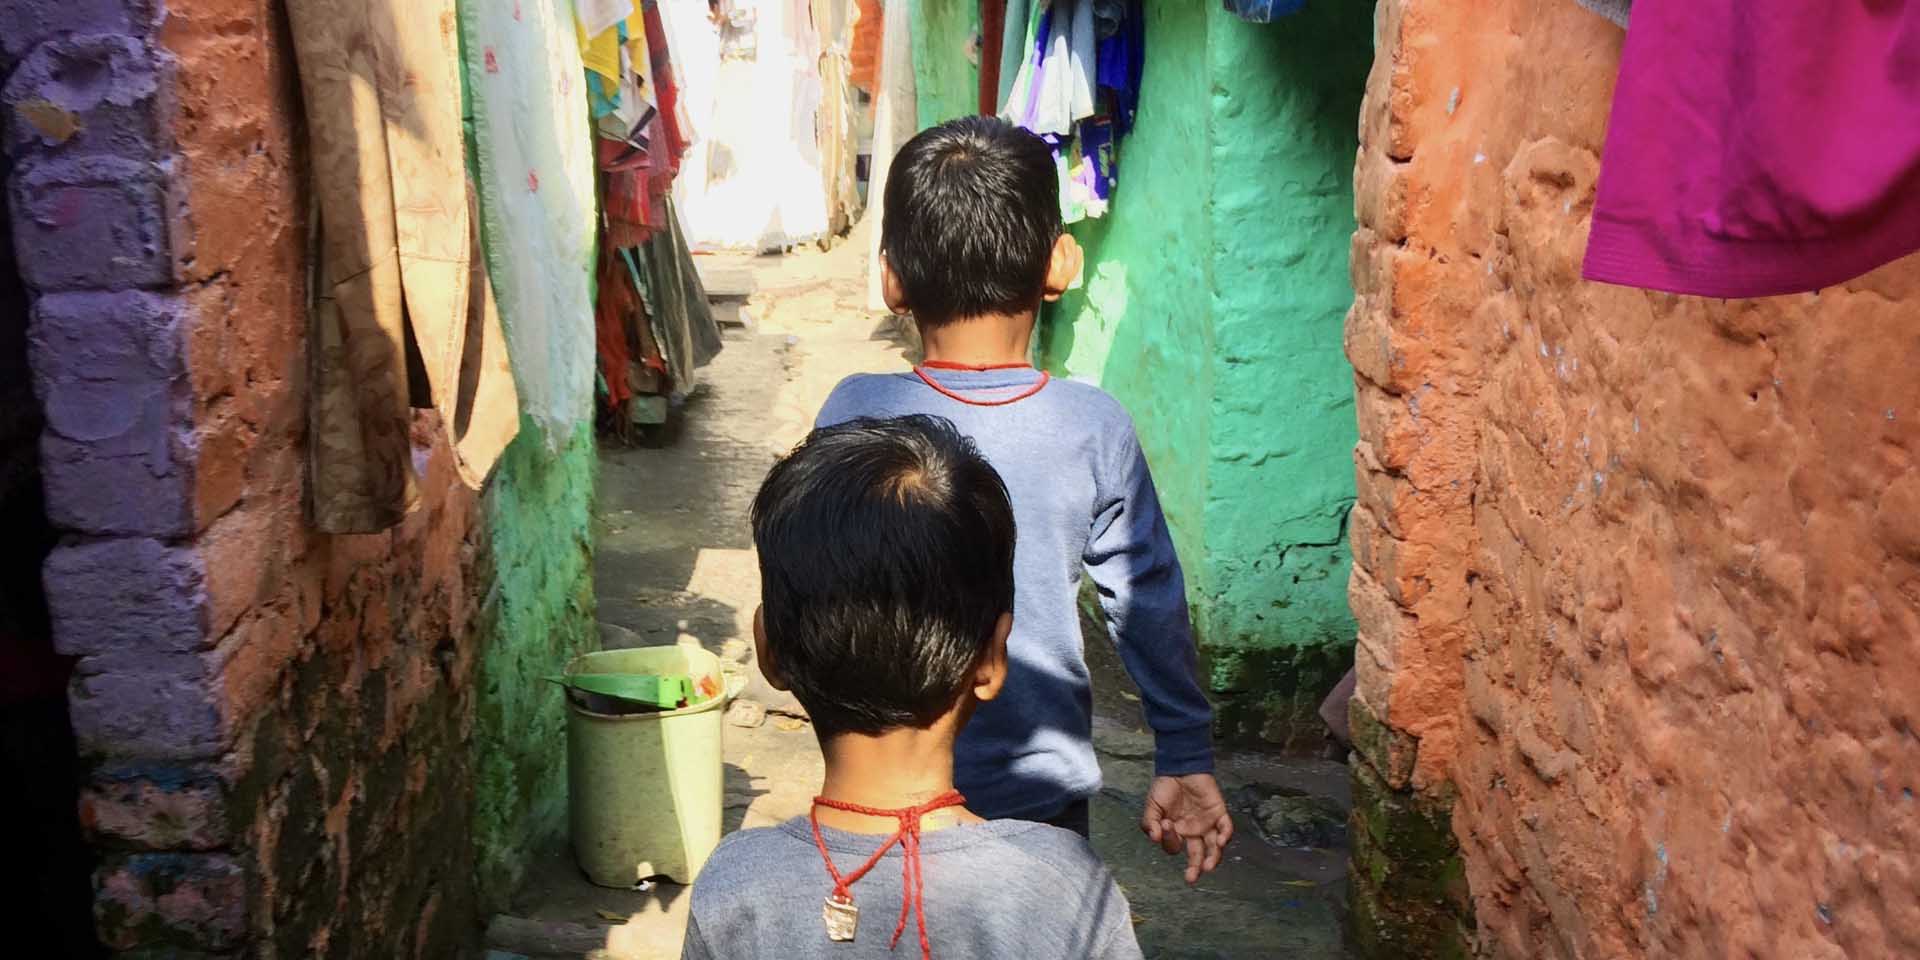 Two children in playing in a gully